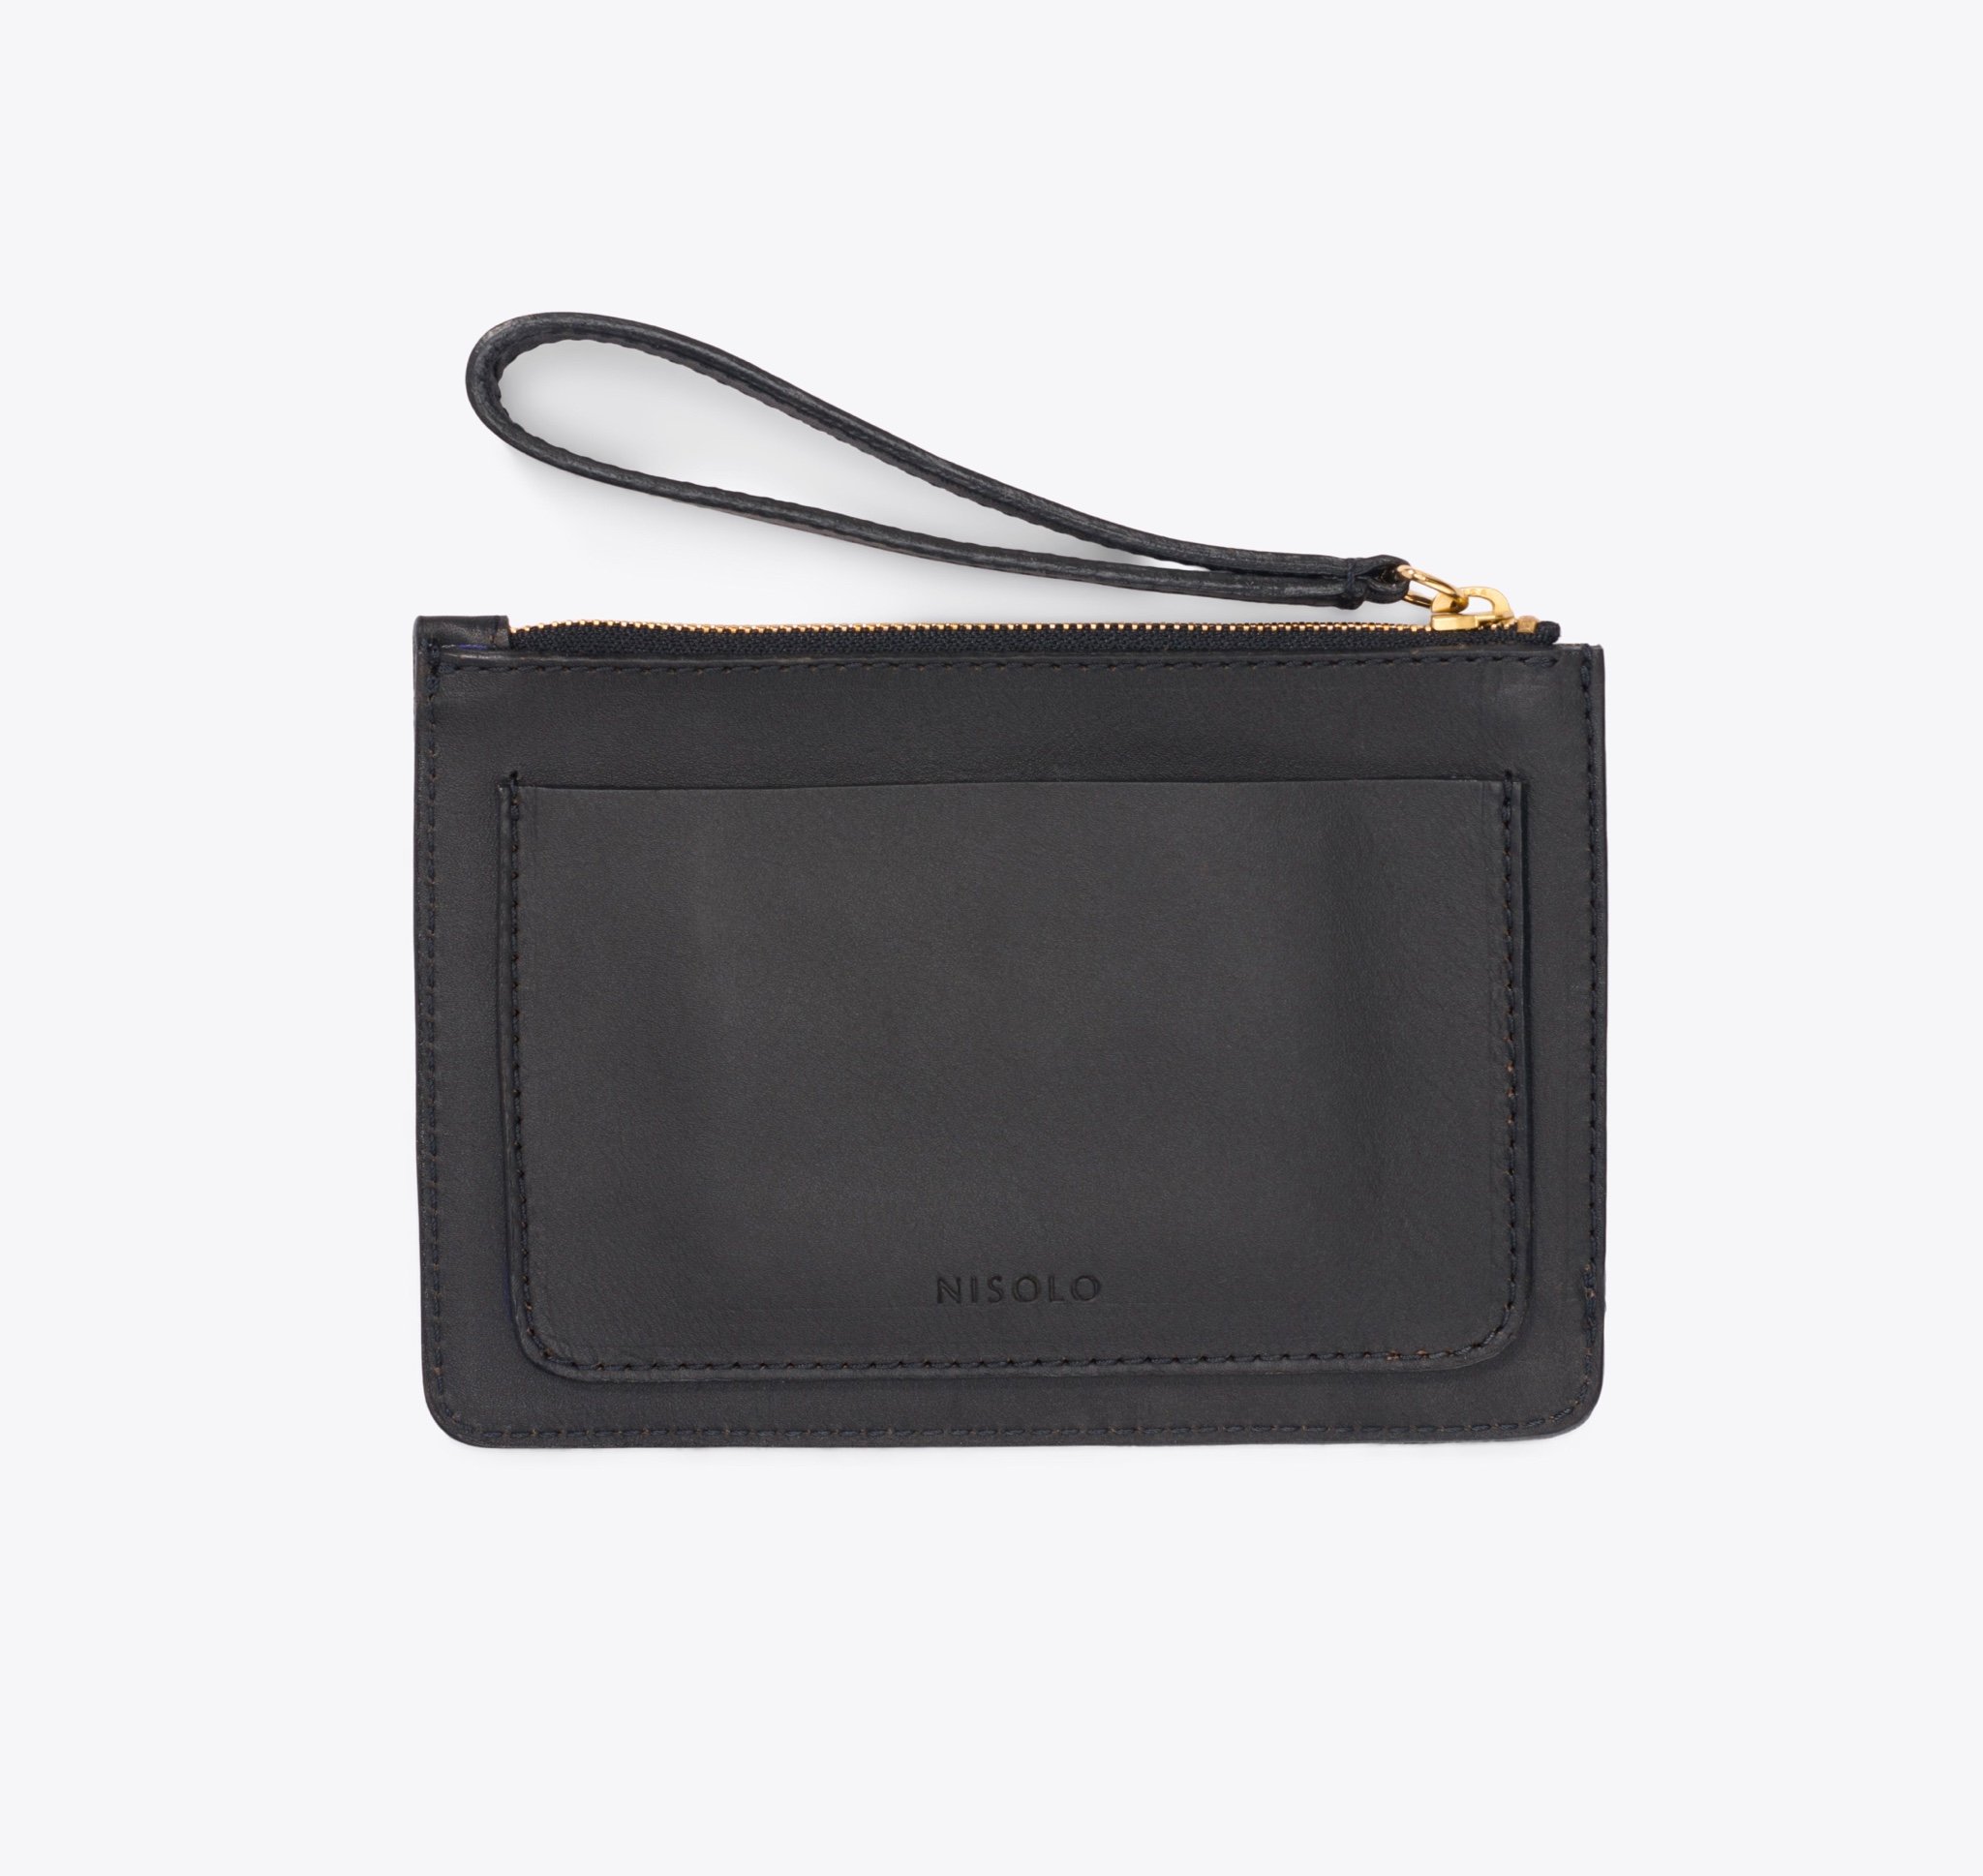 Nisolo Go-To Wristlet Clutch Black - Every Nisolo product is built on the foundation of comfort, function, and design. 